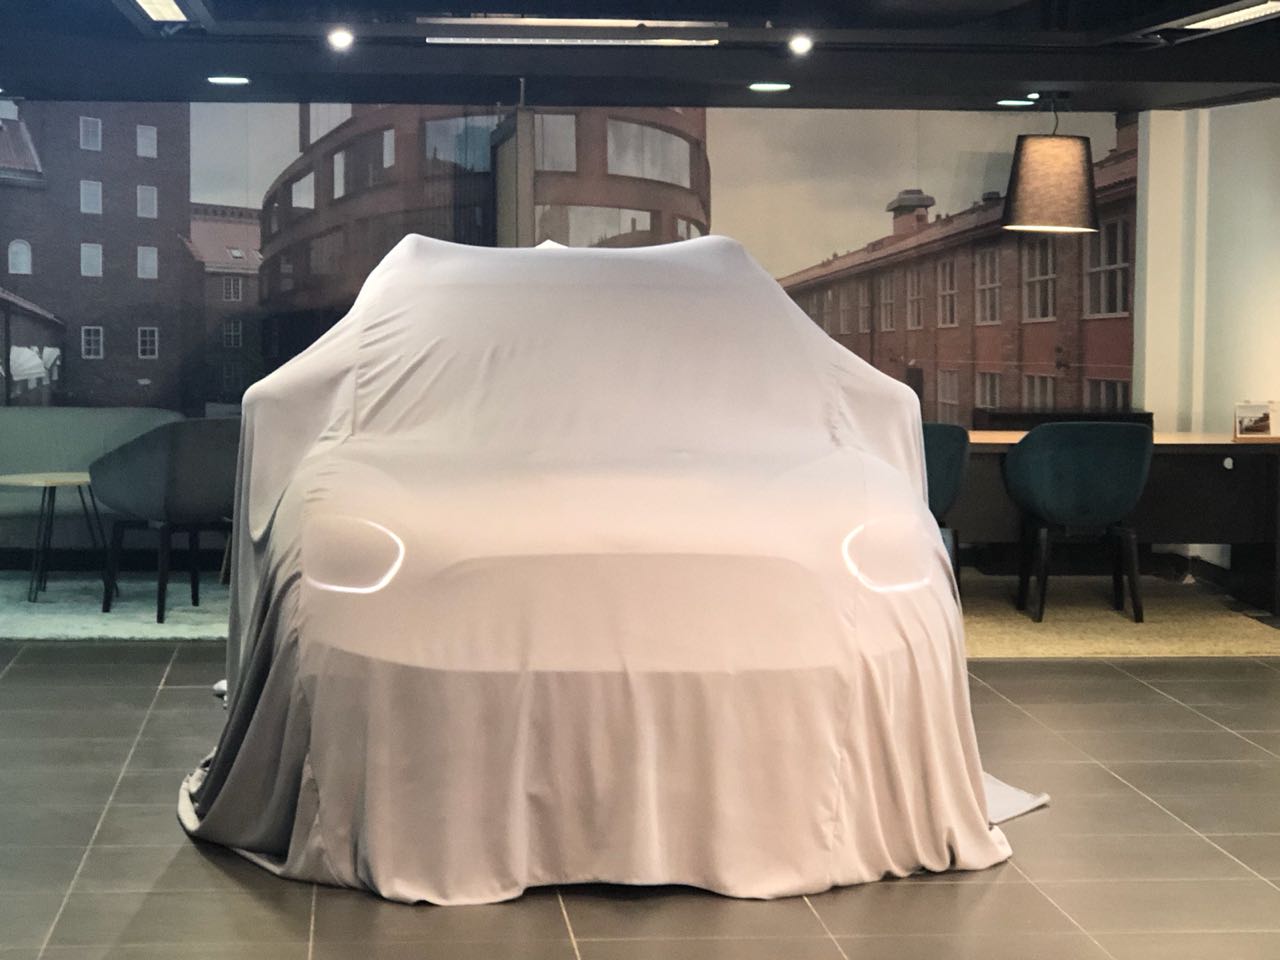 <p>Under the wraps in the all-new, second-generation Mini Countryman!</p>